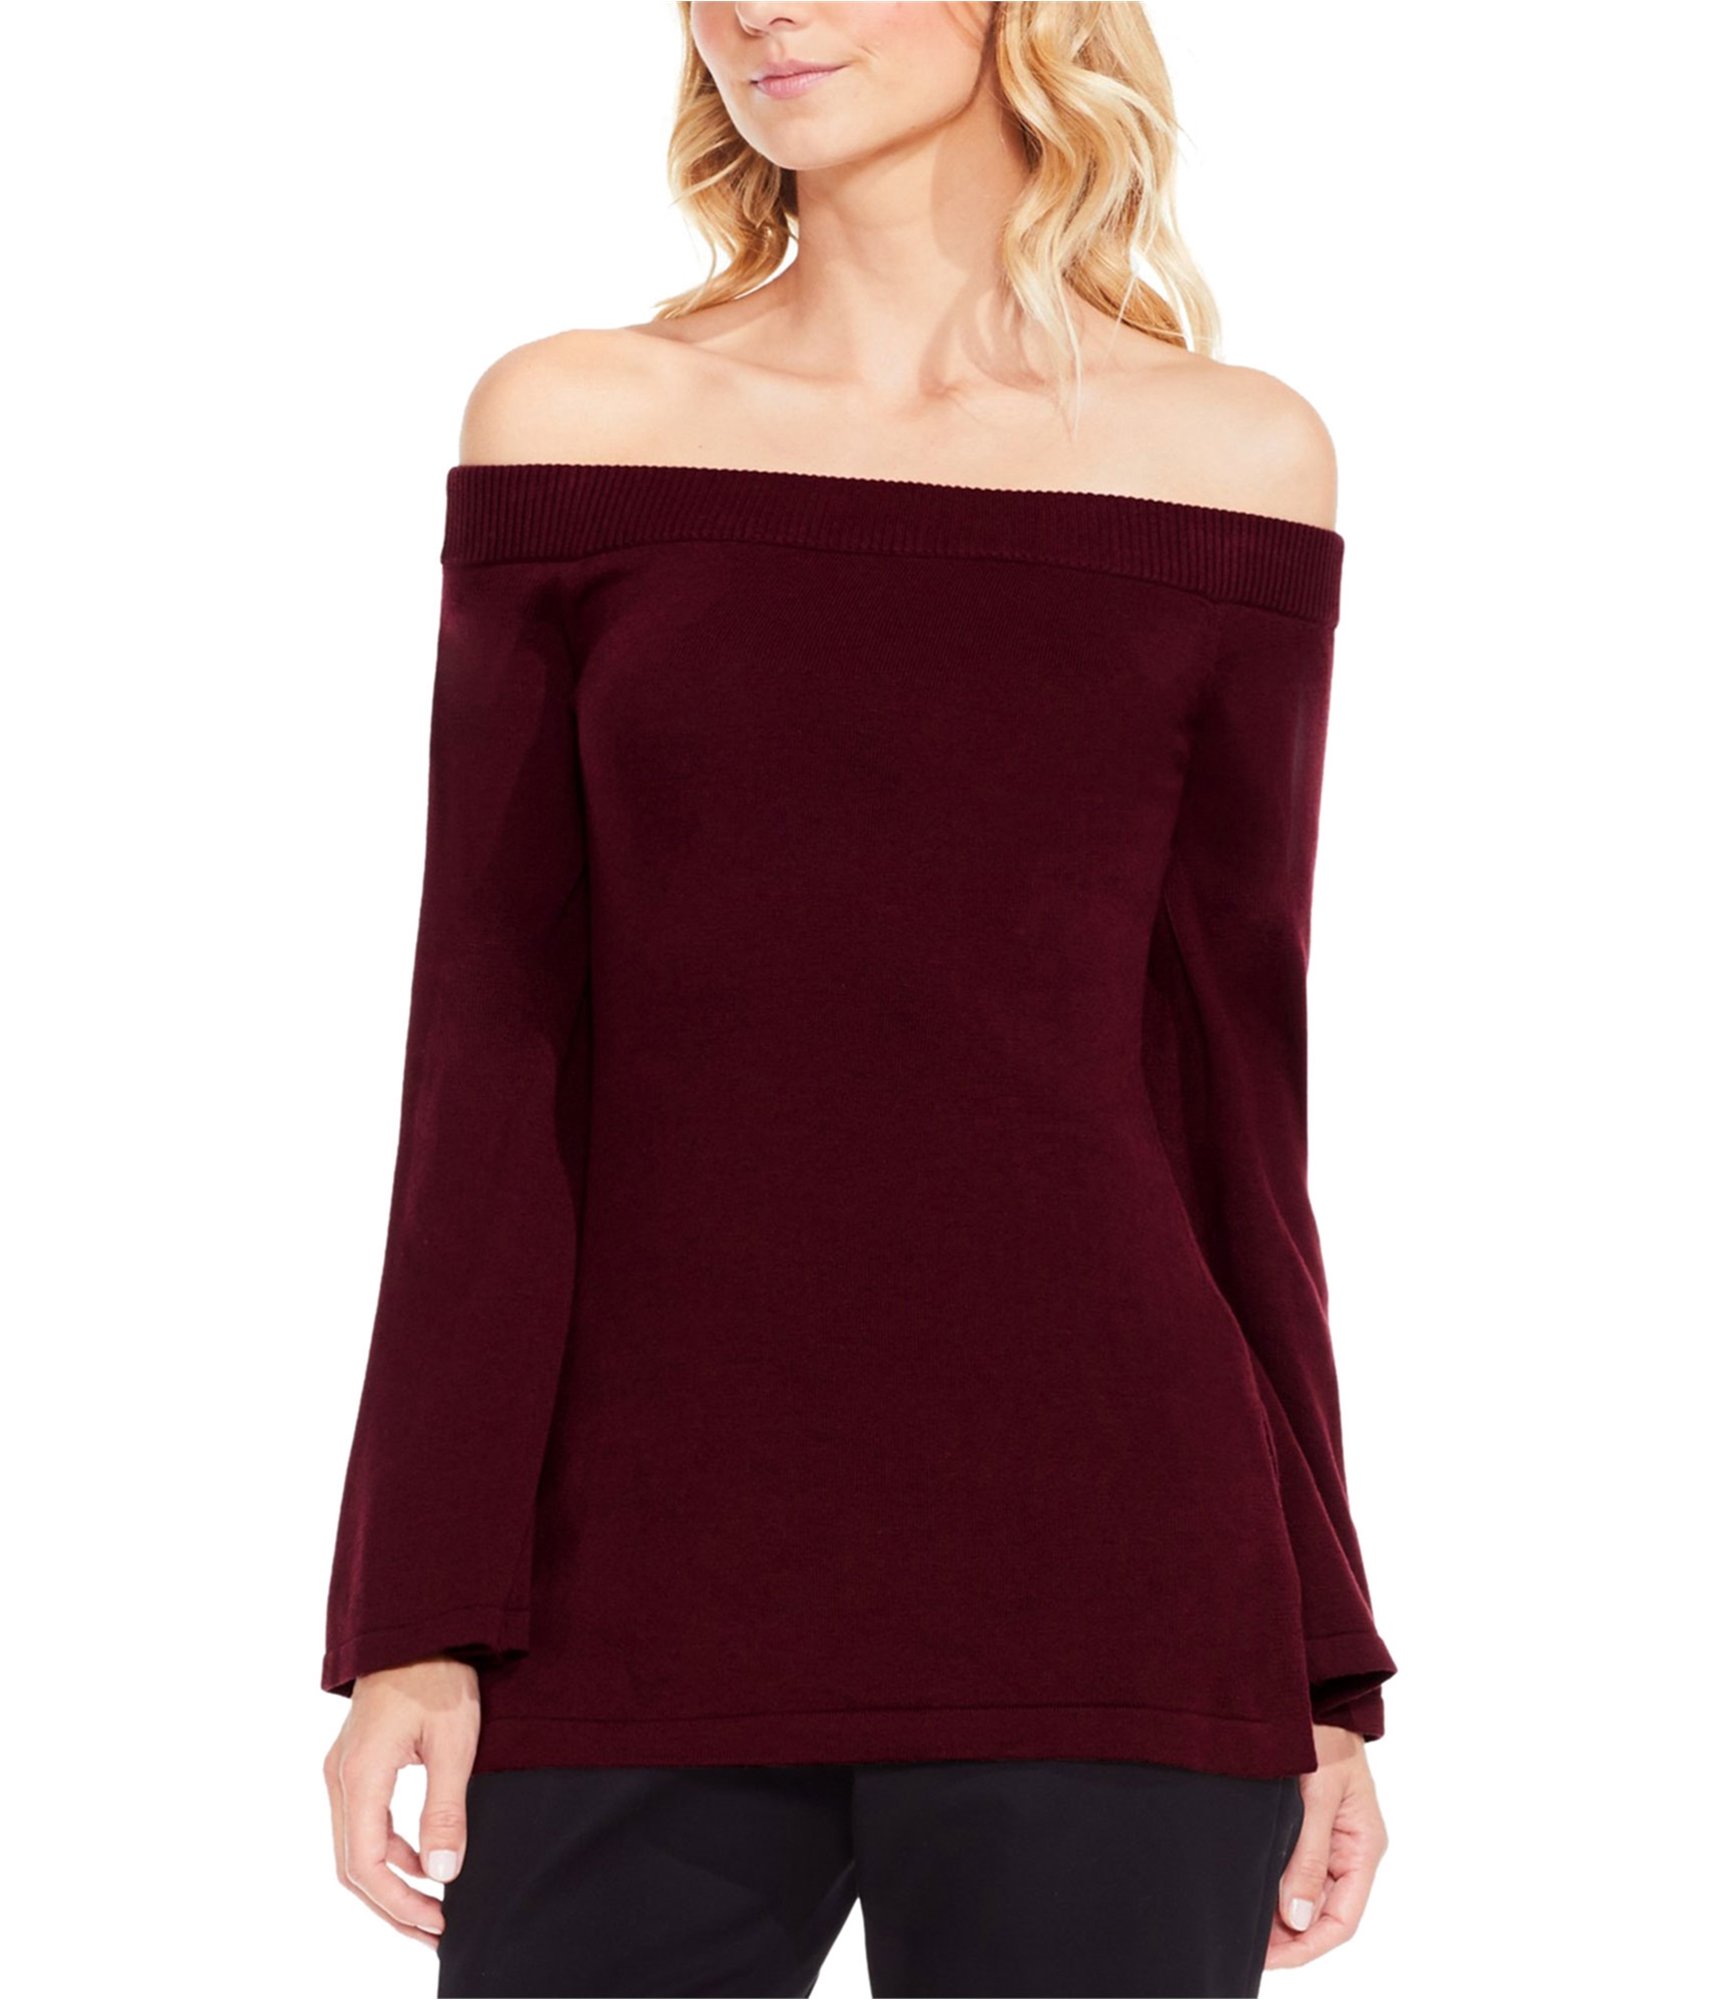 model-wearing-an-off-the-shoulder-sweater-top